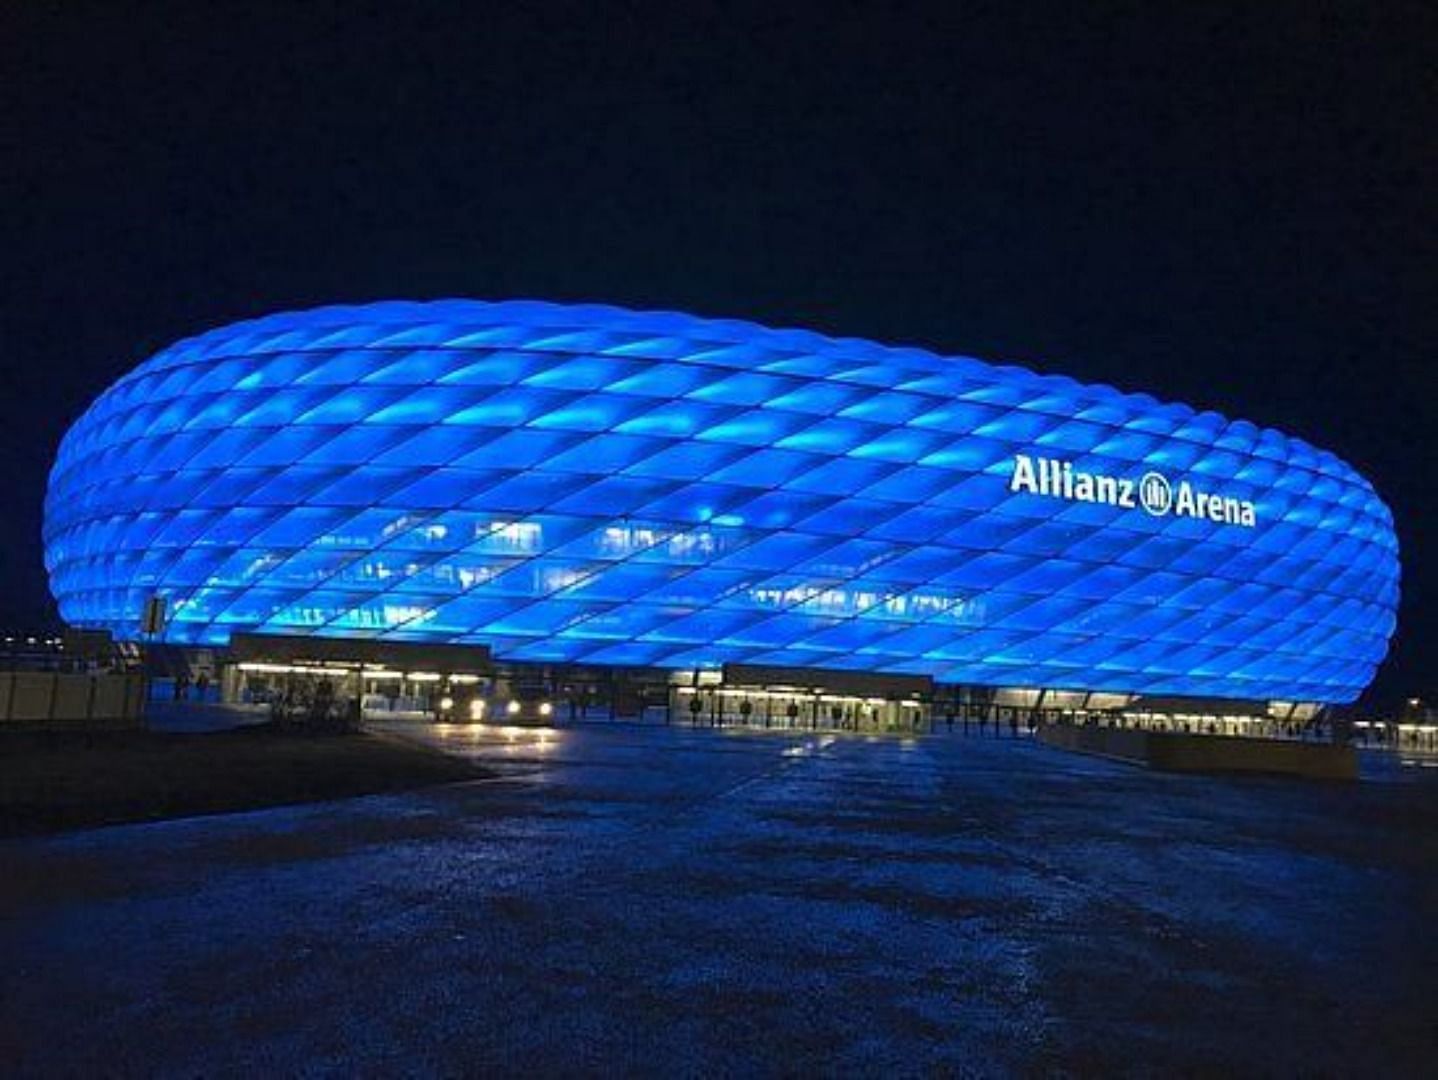 The Allianz Arena is famous for its exterior that can be lit up wonderfully.